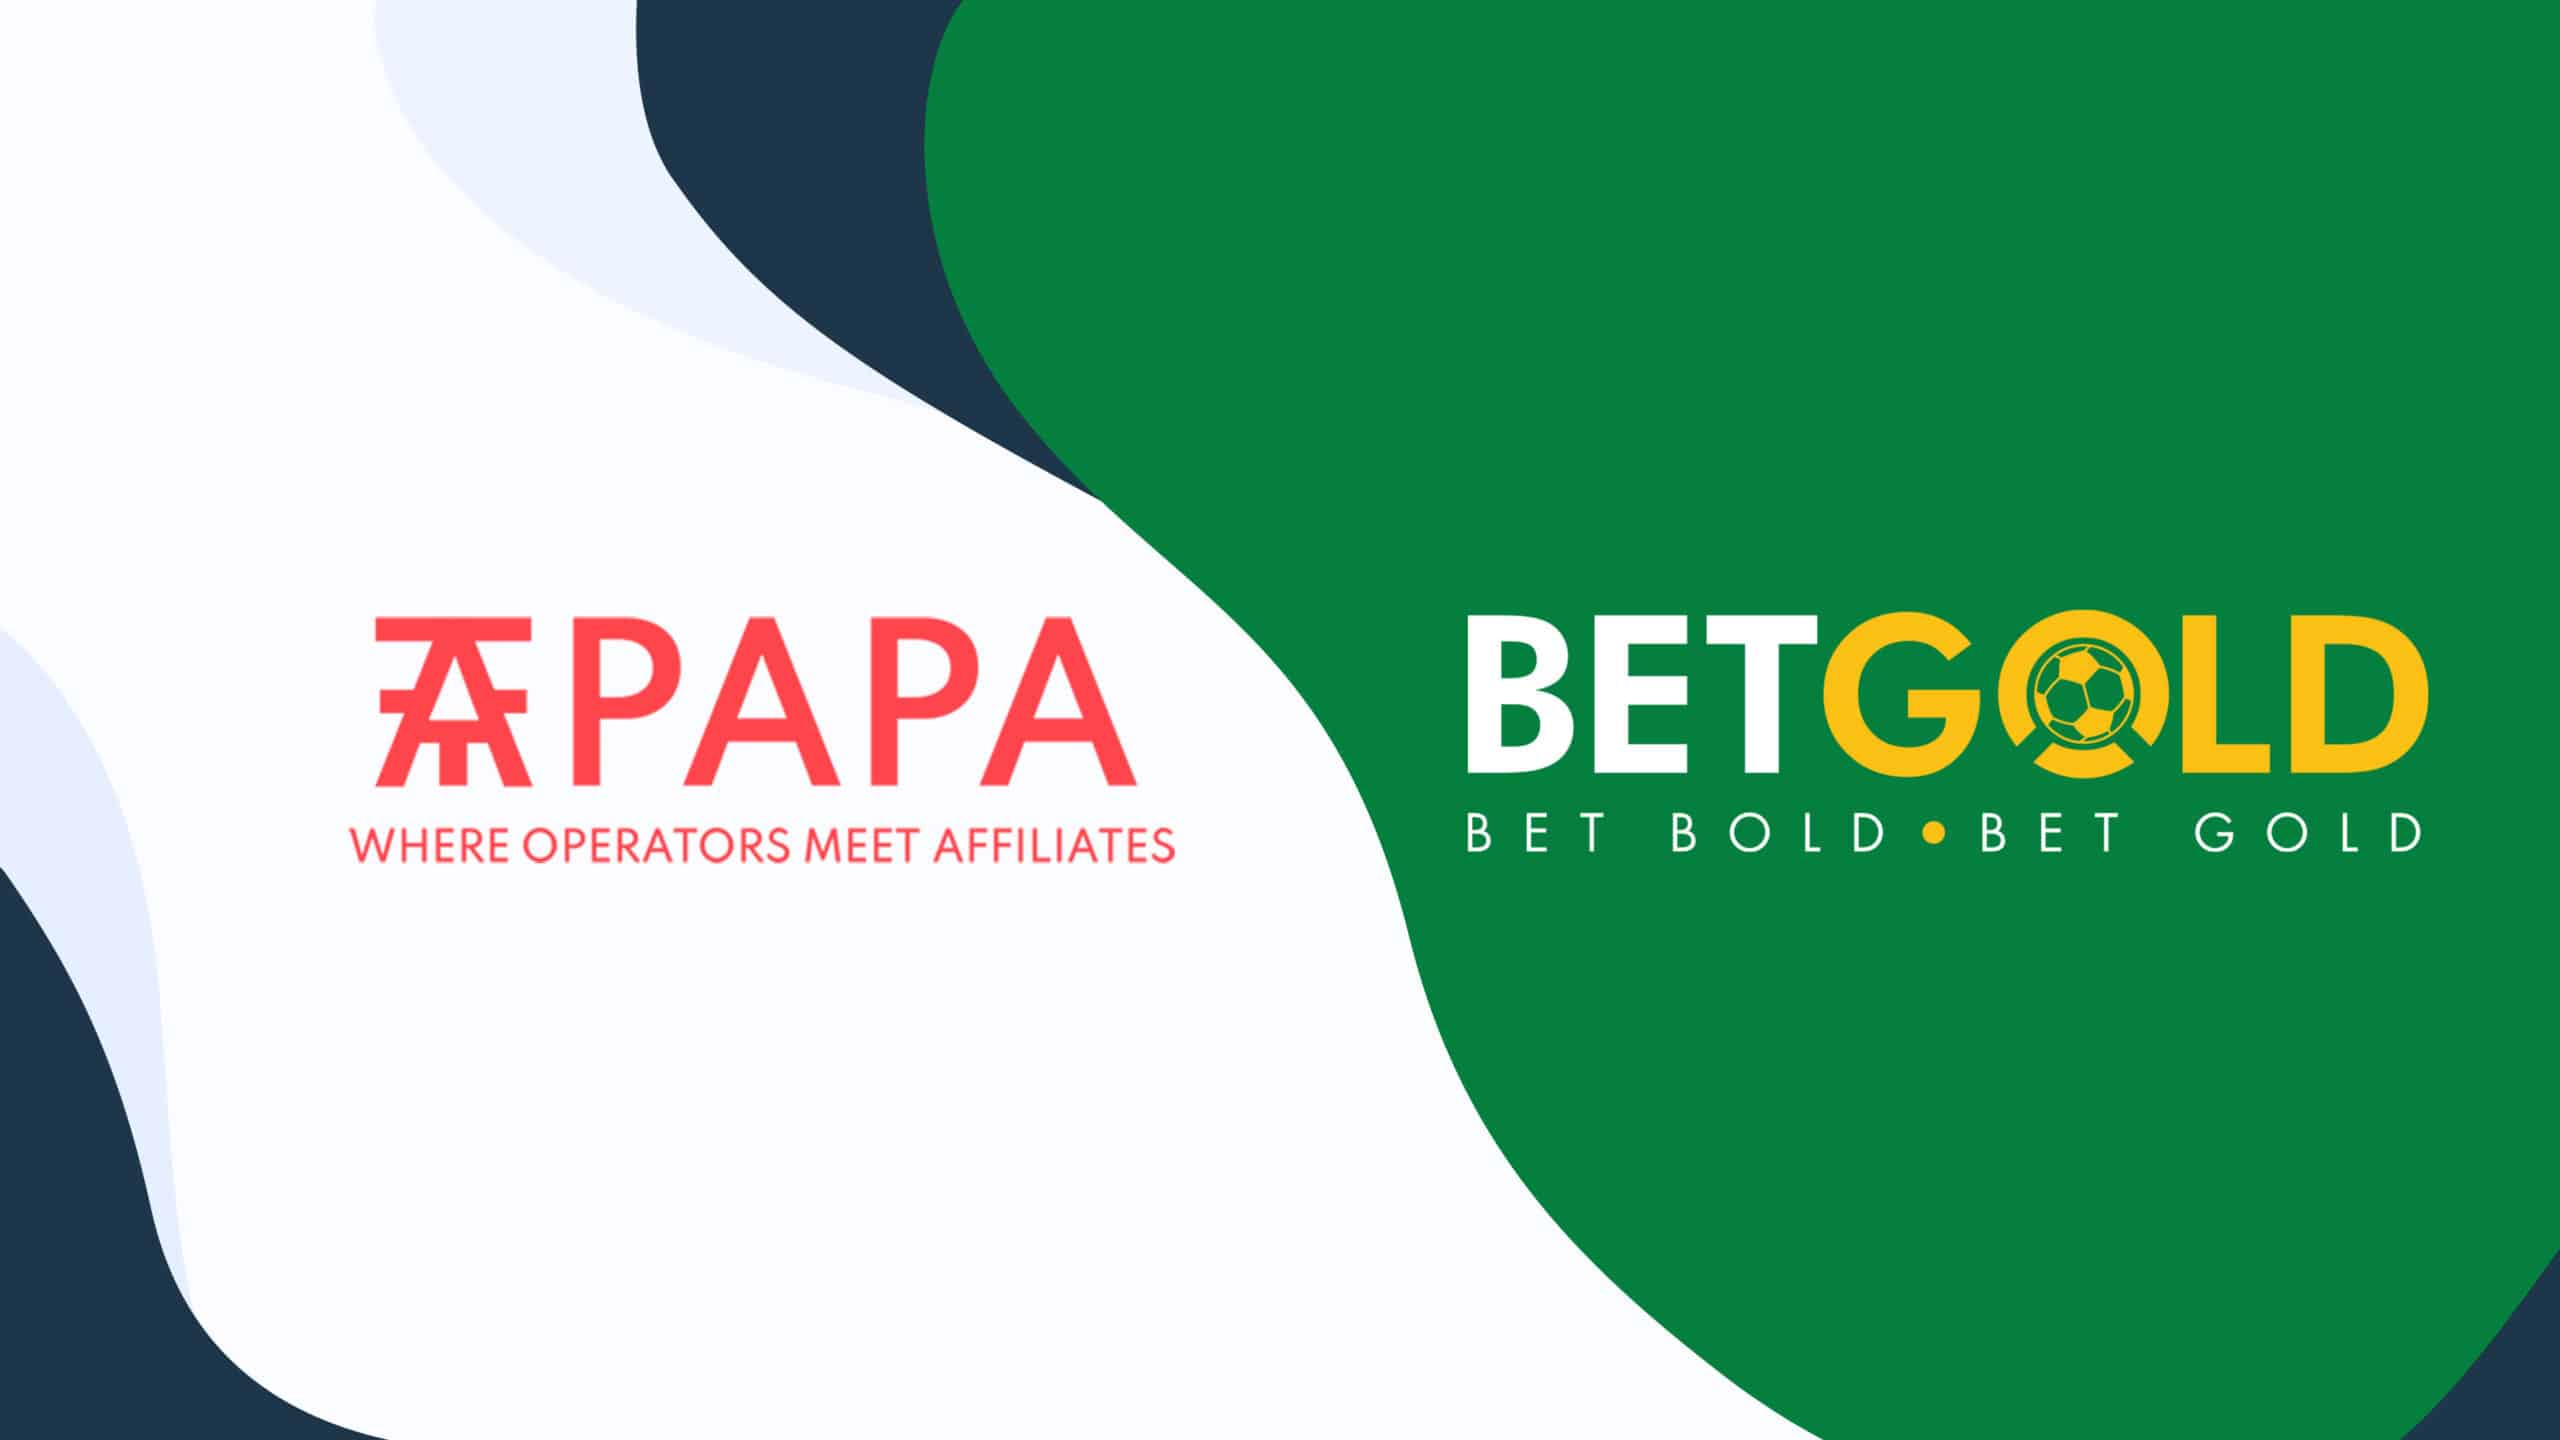 AffPapa directory announces partnership with BetGold